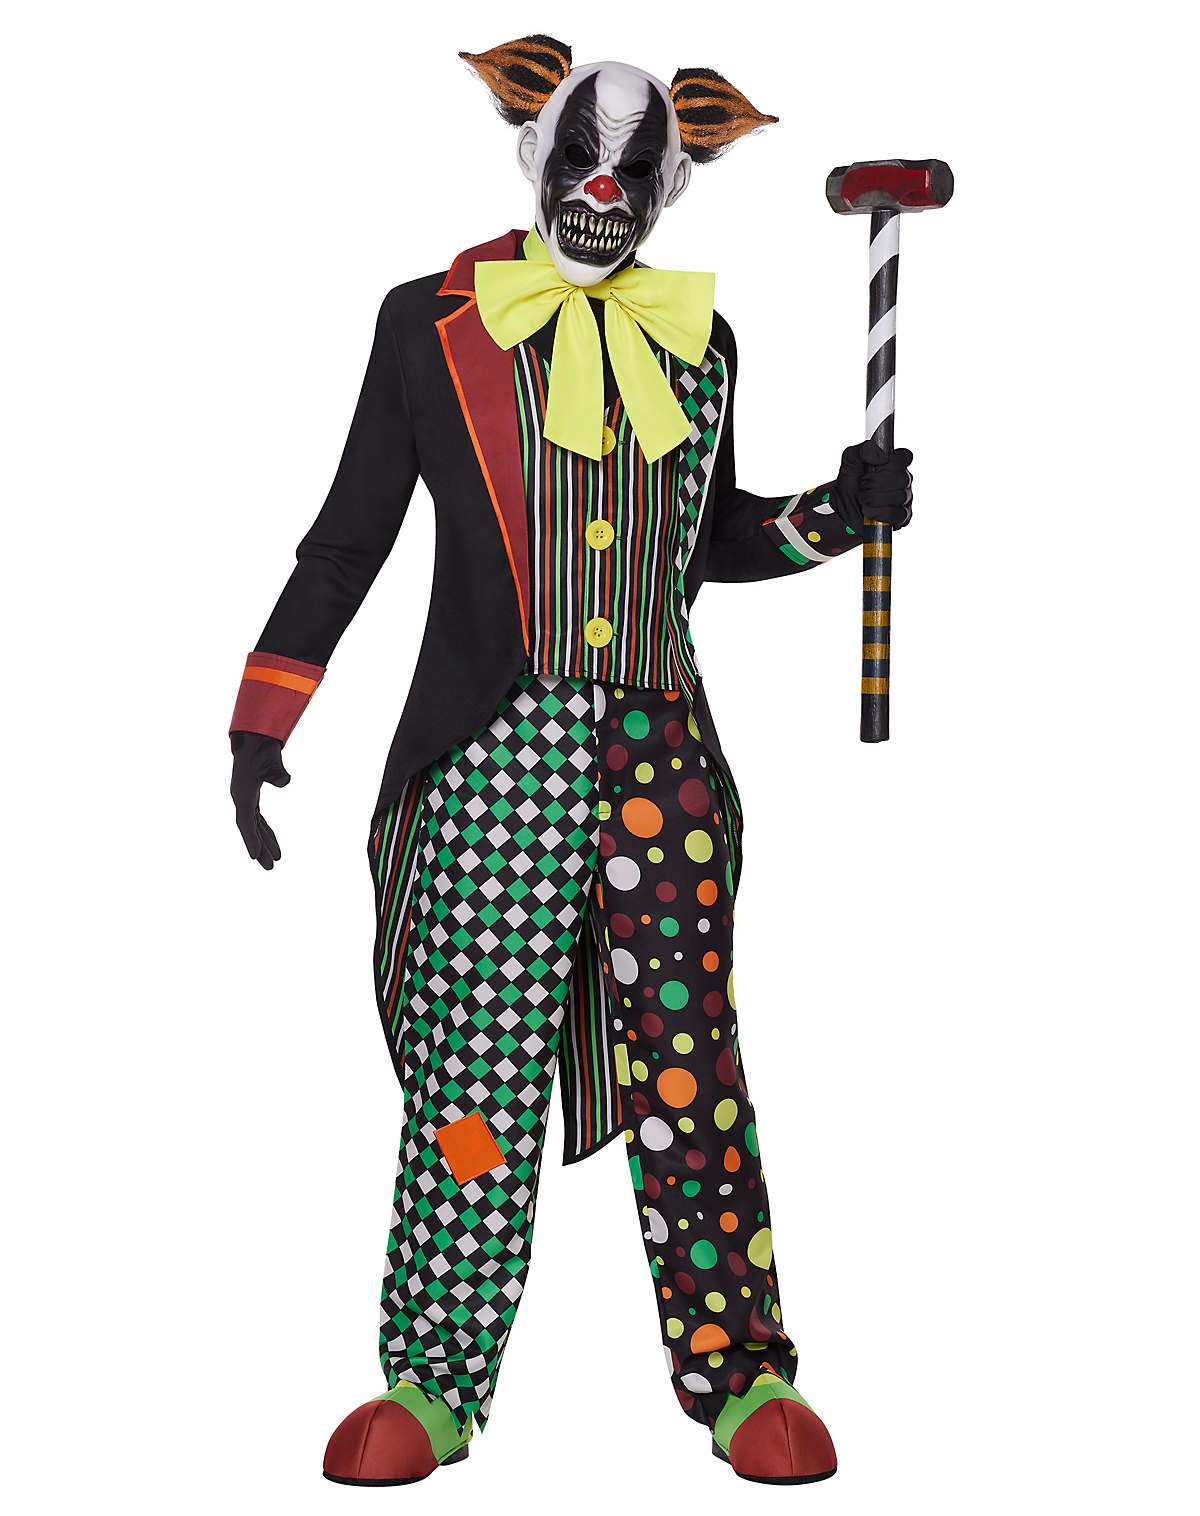 Adult Scary Clown Costume - The Signature Collection